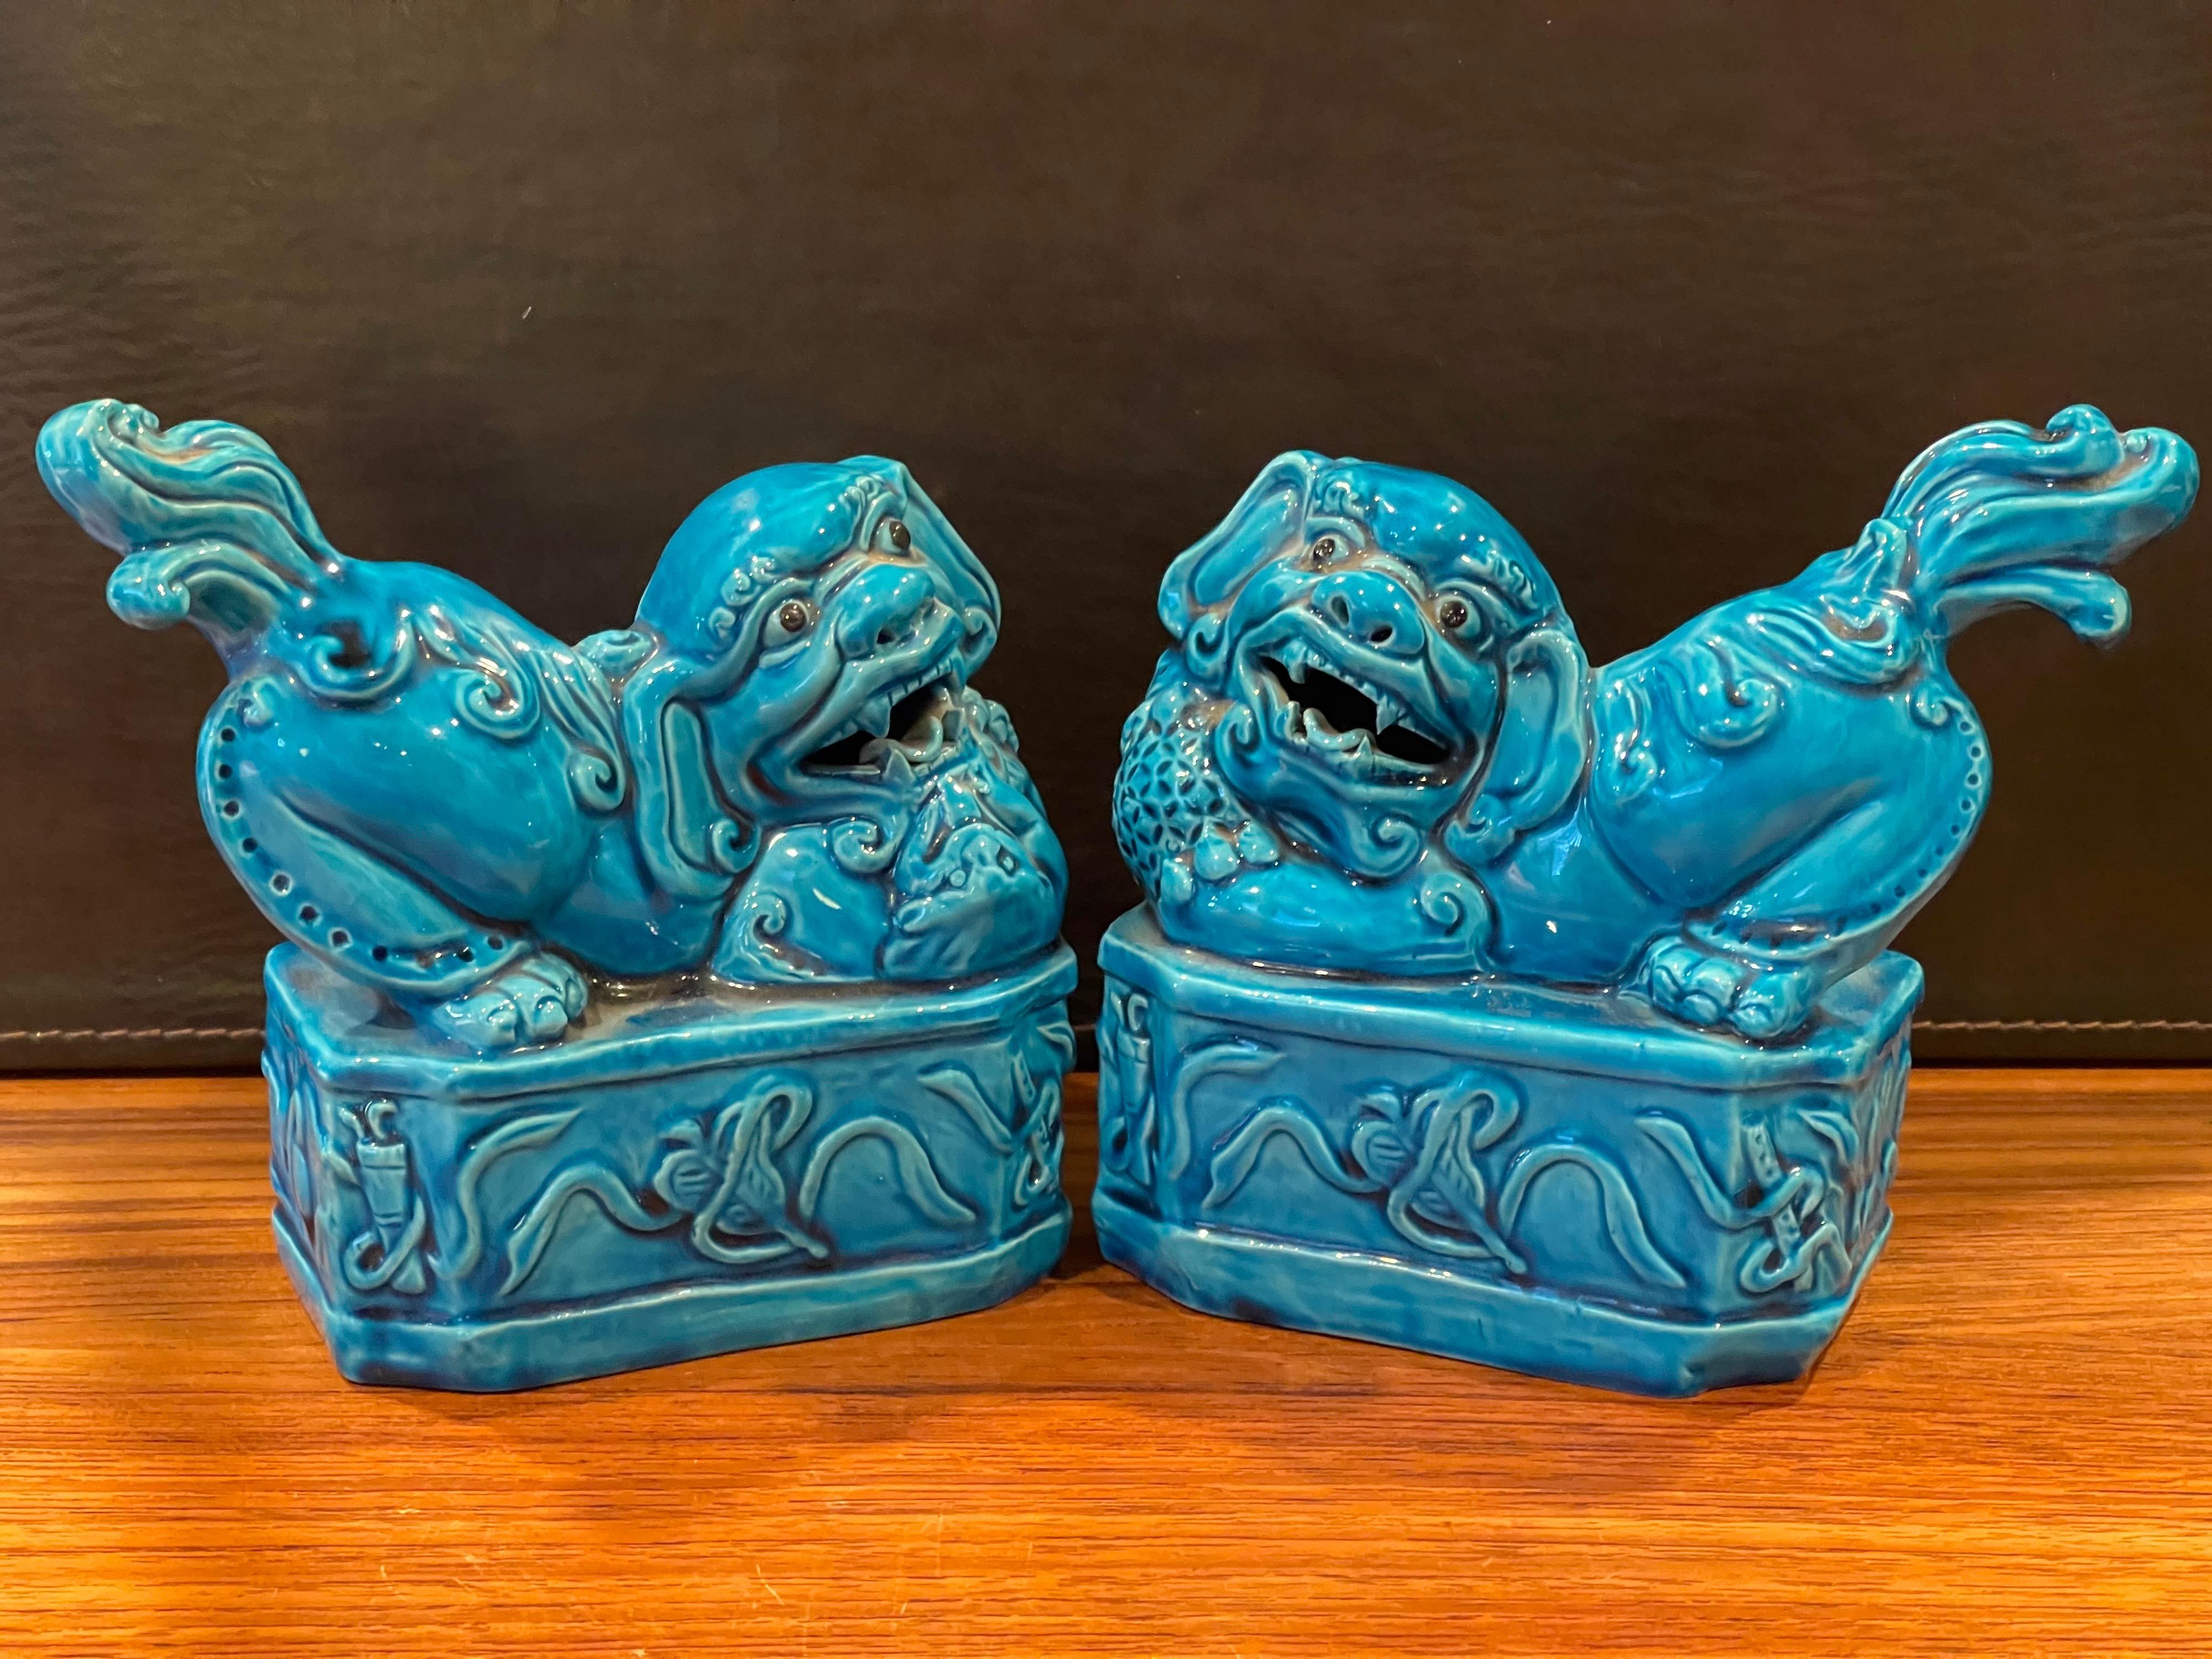 A very nice pair of mid-century aqua ceramic foo dogs / bookends, circa 1970s. The pair are in very good vintage with no chips or cracks and have a wonderful patina. They measure: 14